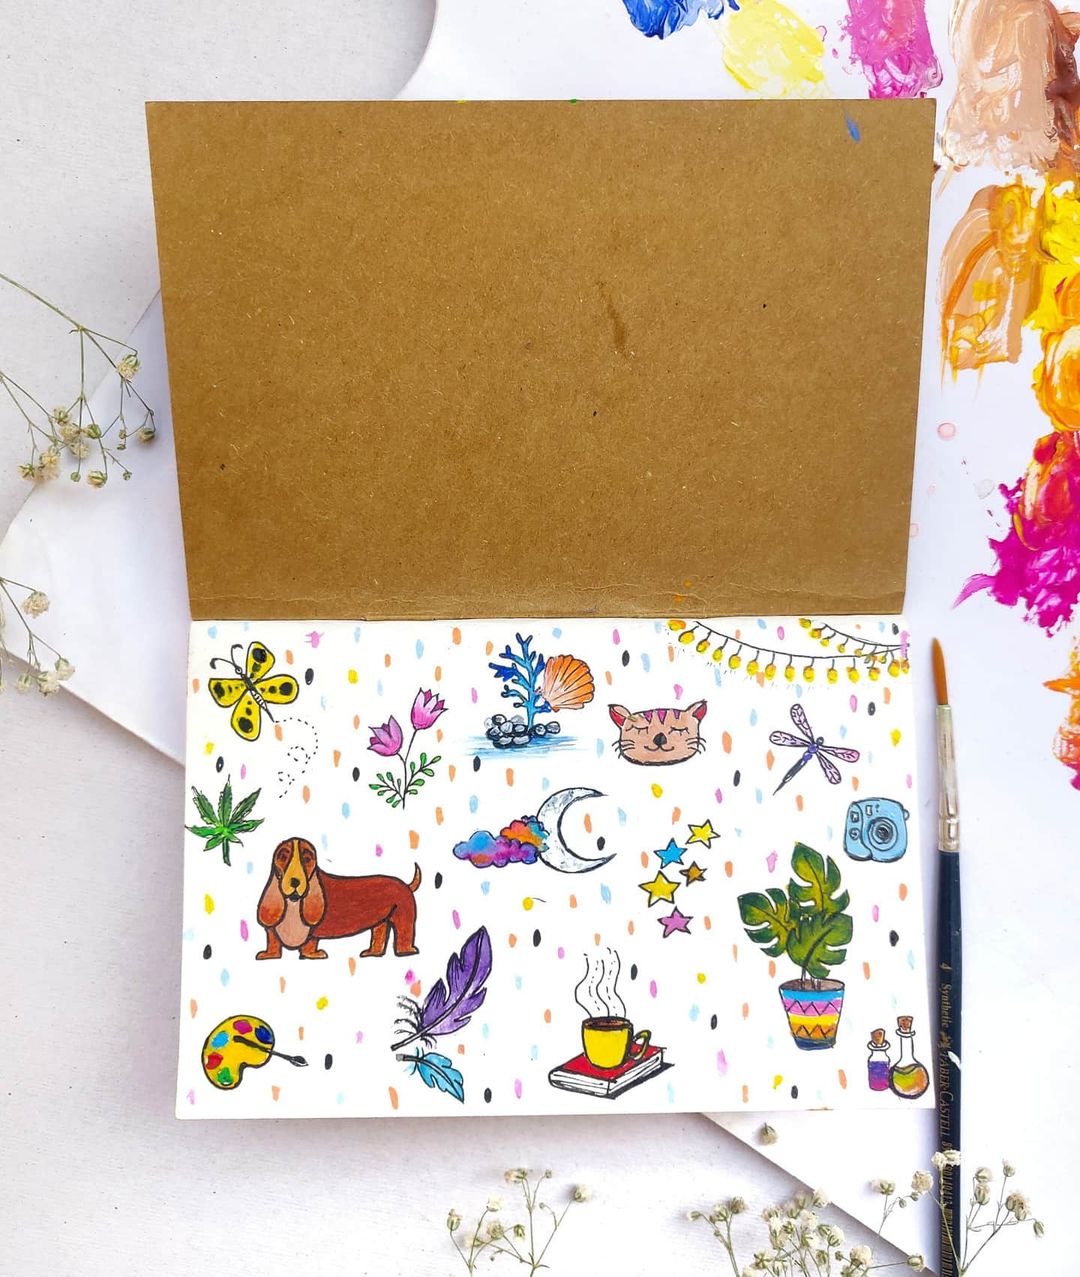 6. Nature and animal drawings in a journal with colourful dotted background